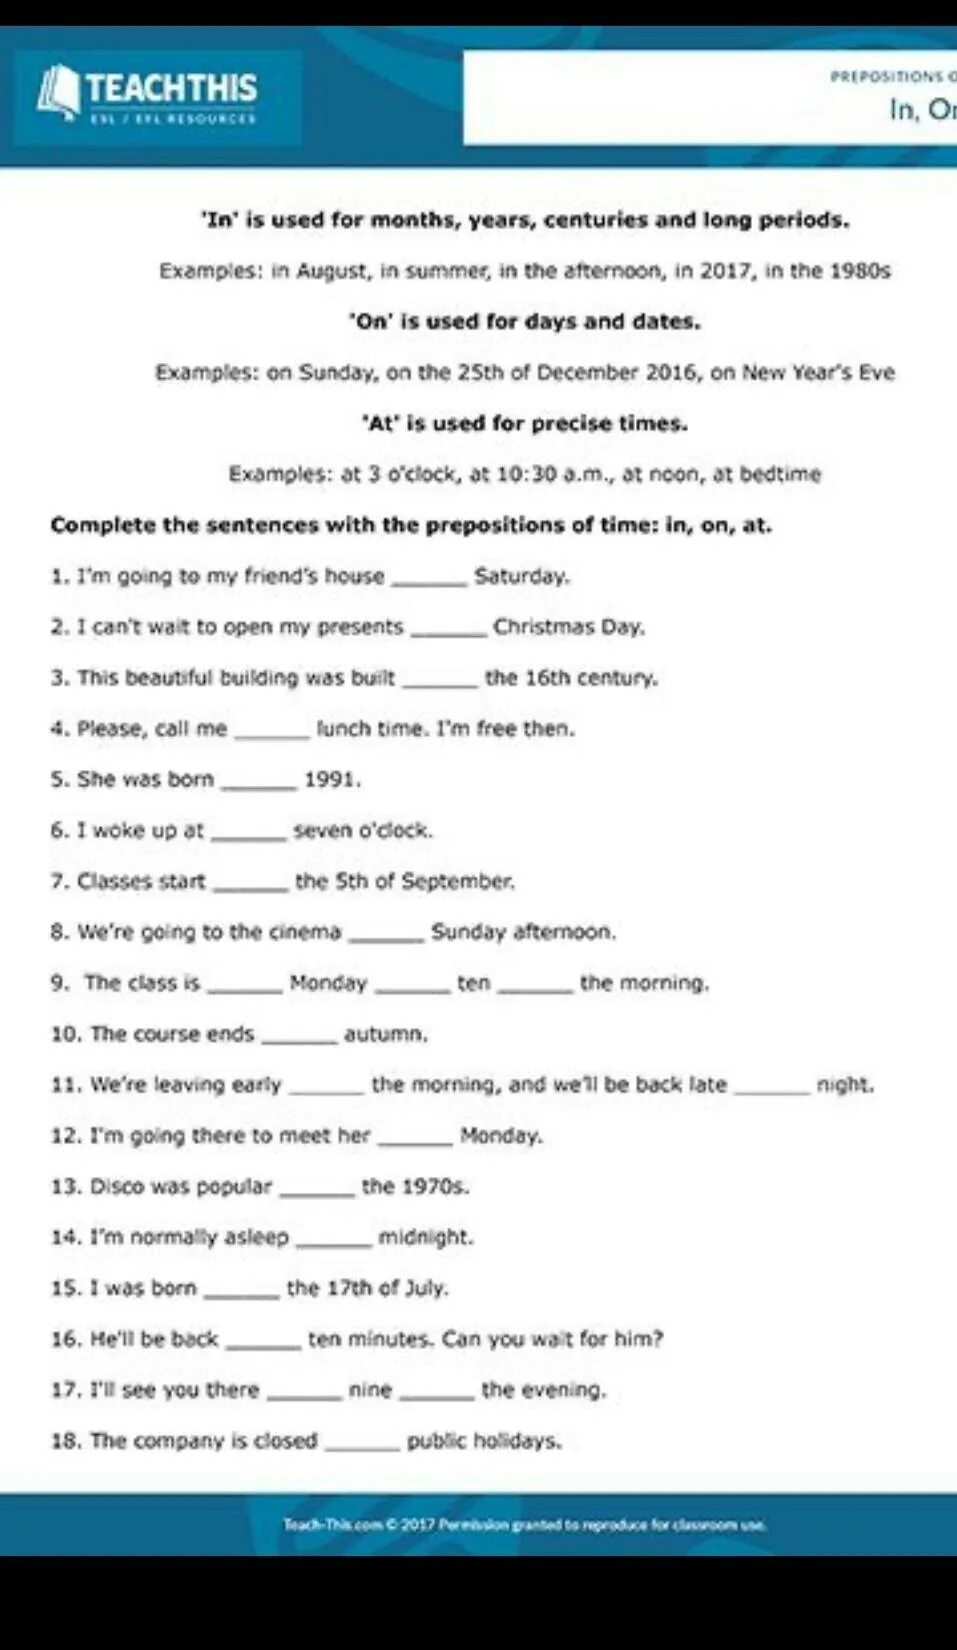 Prepositions of time Worksheets. Prepositions of time Grammar. In on at в английском языке Worksheets. Предлоги at in on в английском языке Worksheets. In on at worksheets